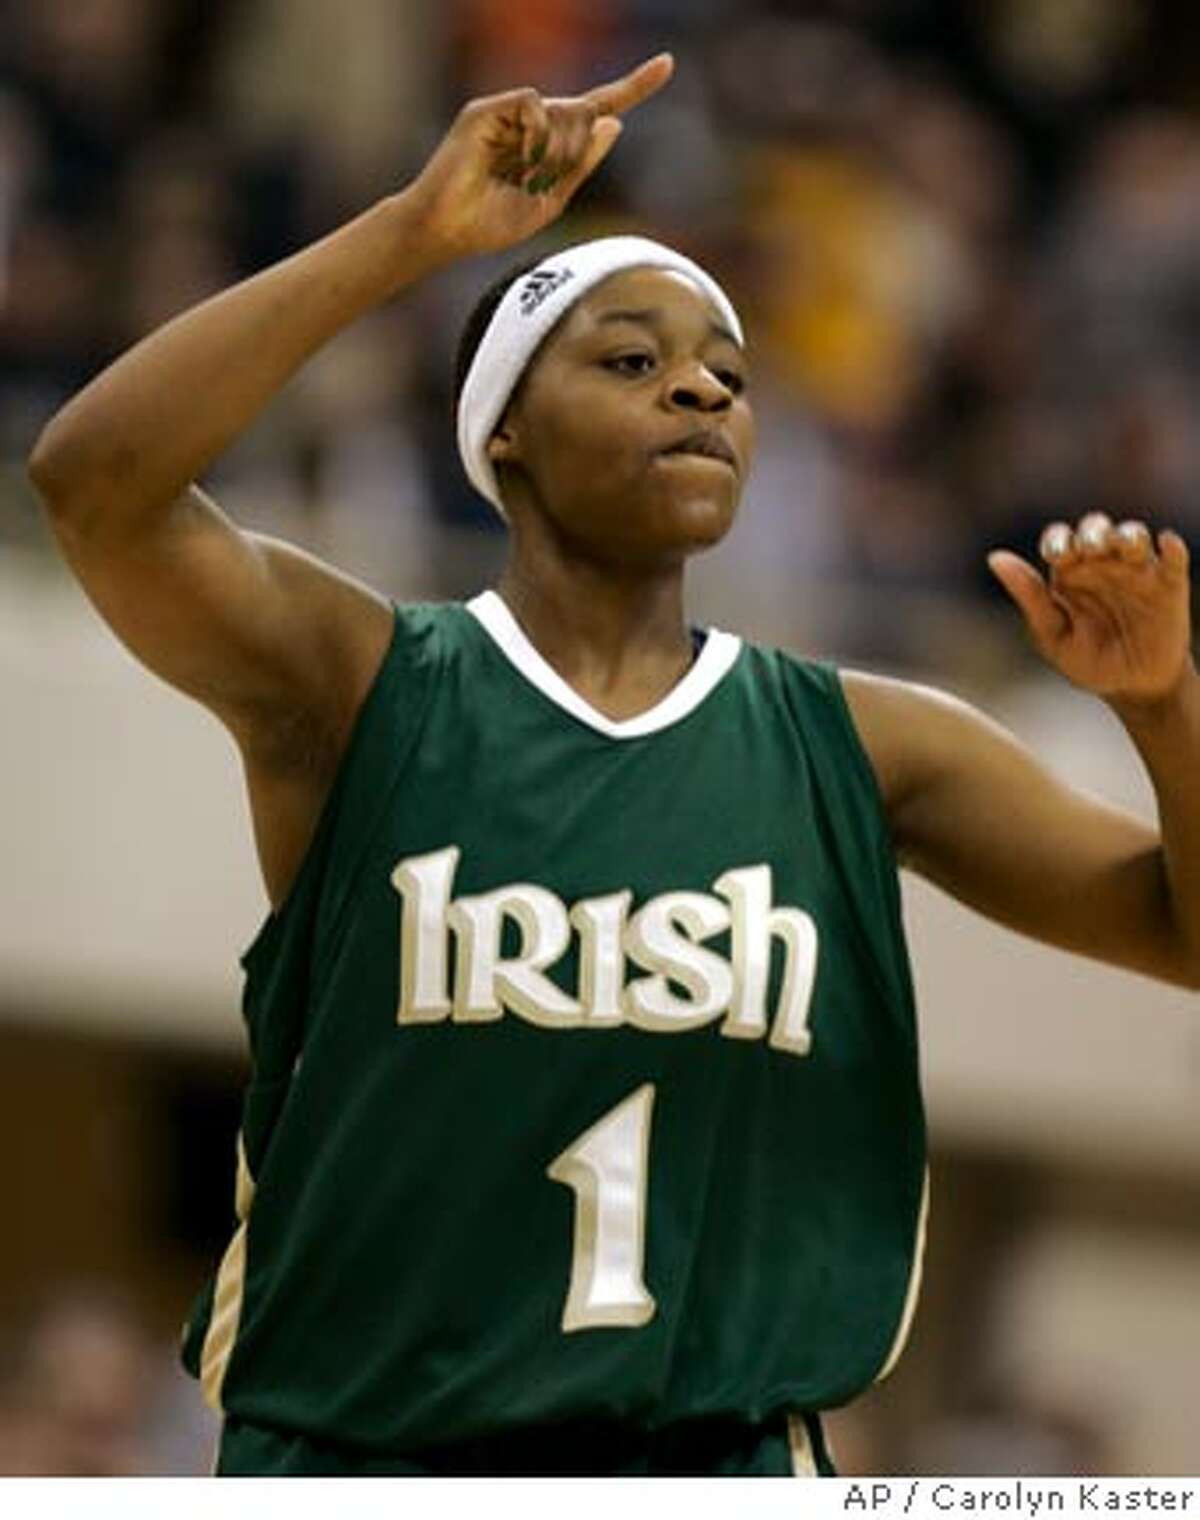 Notre Dame's Tulyah Gaines celebrates their 62-59 during the second half of their NCAA first round basketball game against California in Pittsburgh, Pa., Sunday, March 18, 2007. (AP Photo/Carolyn Kaster)